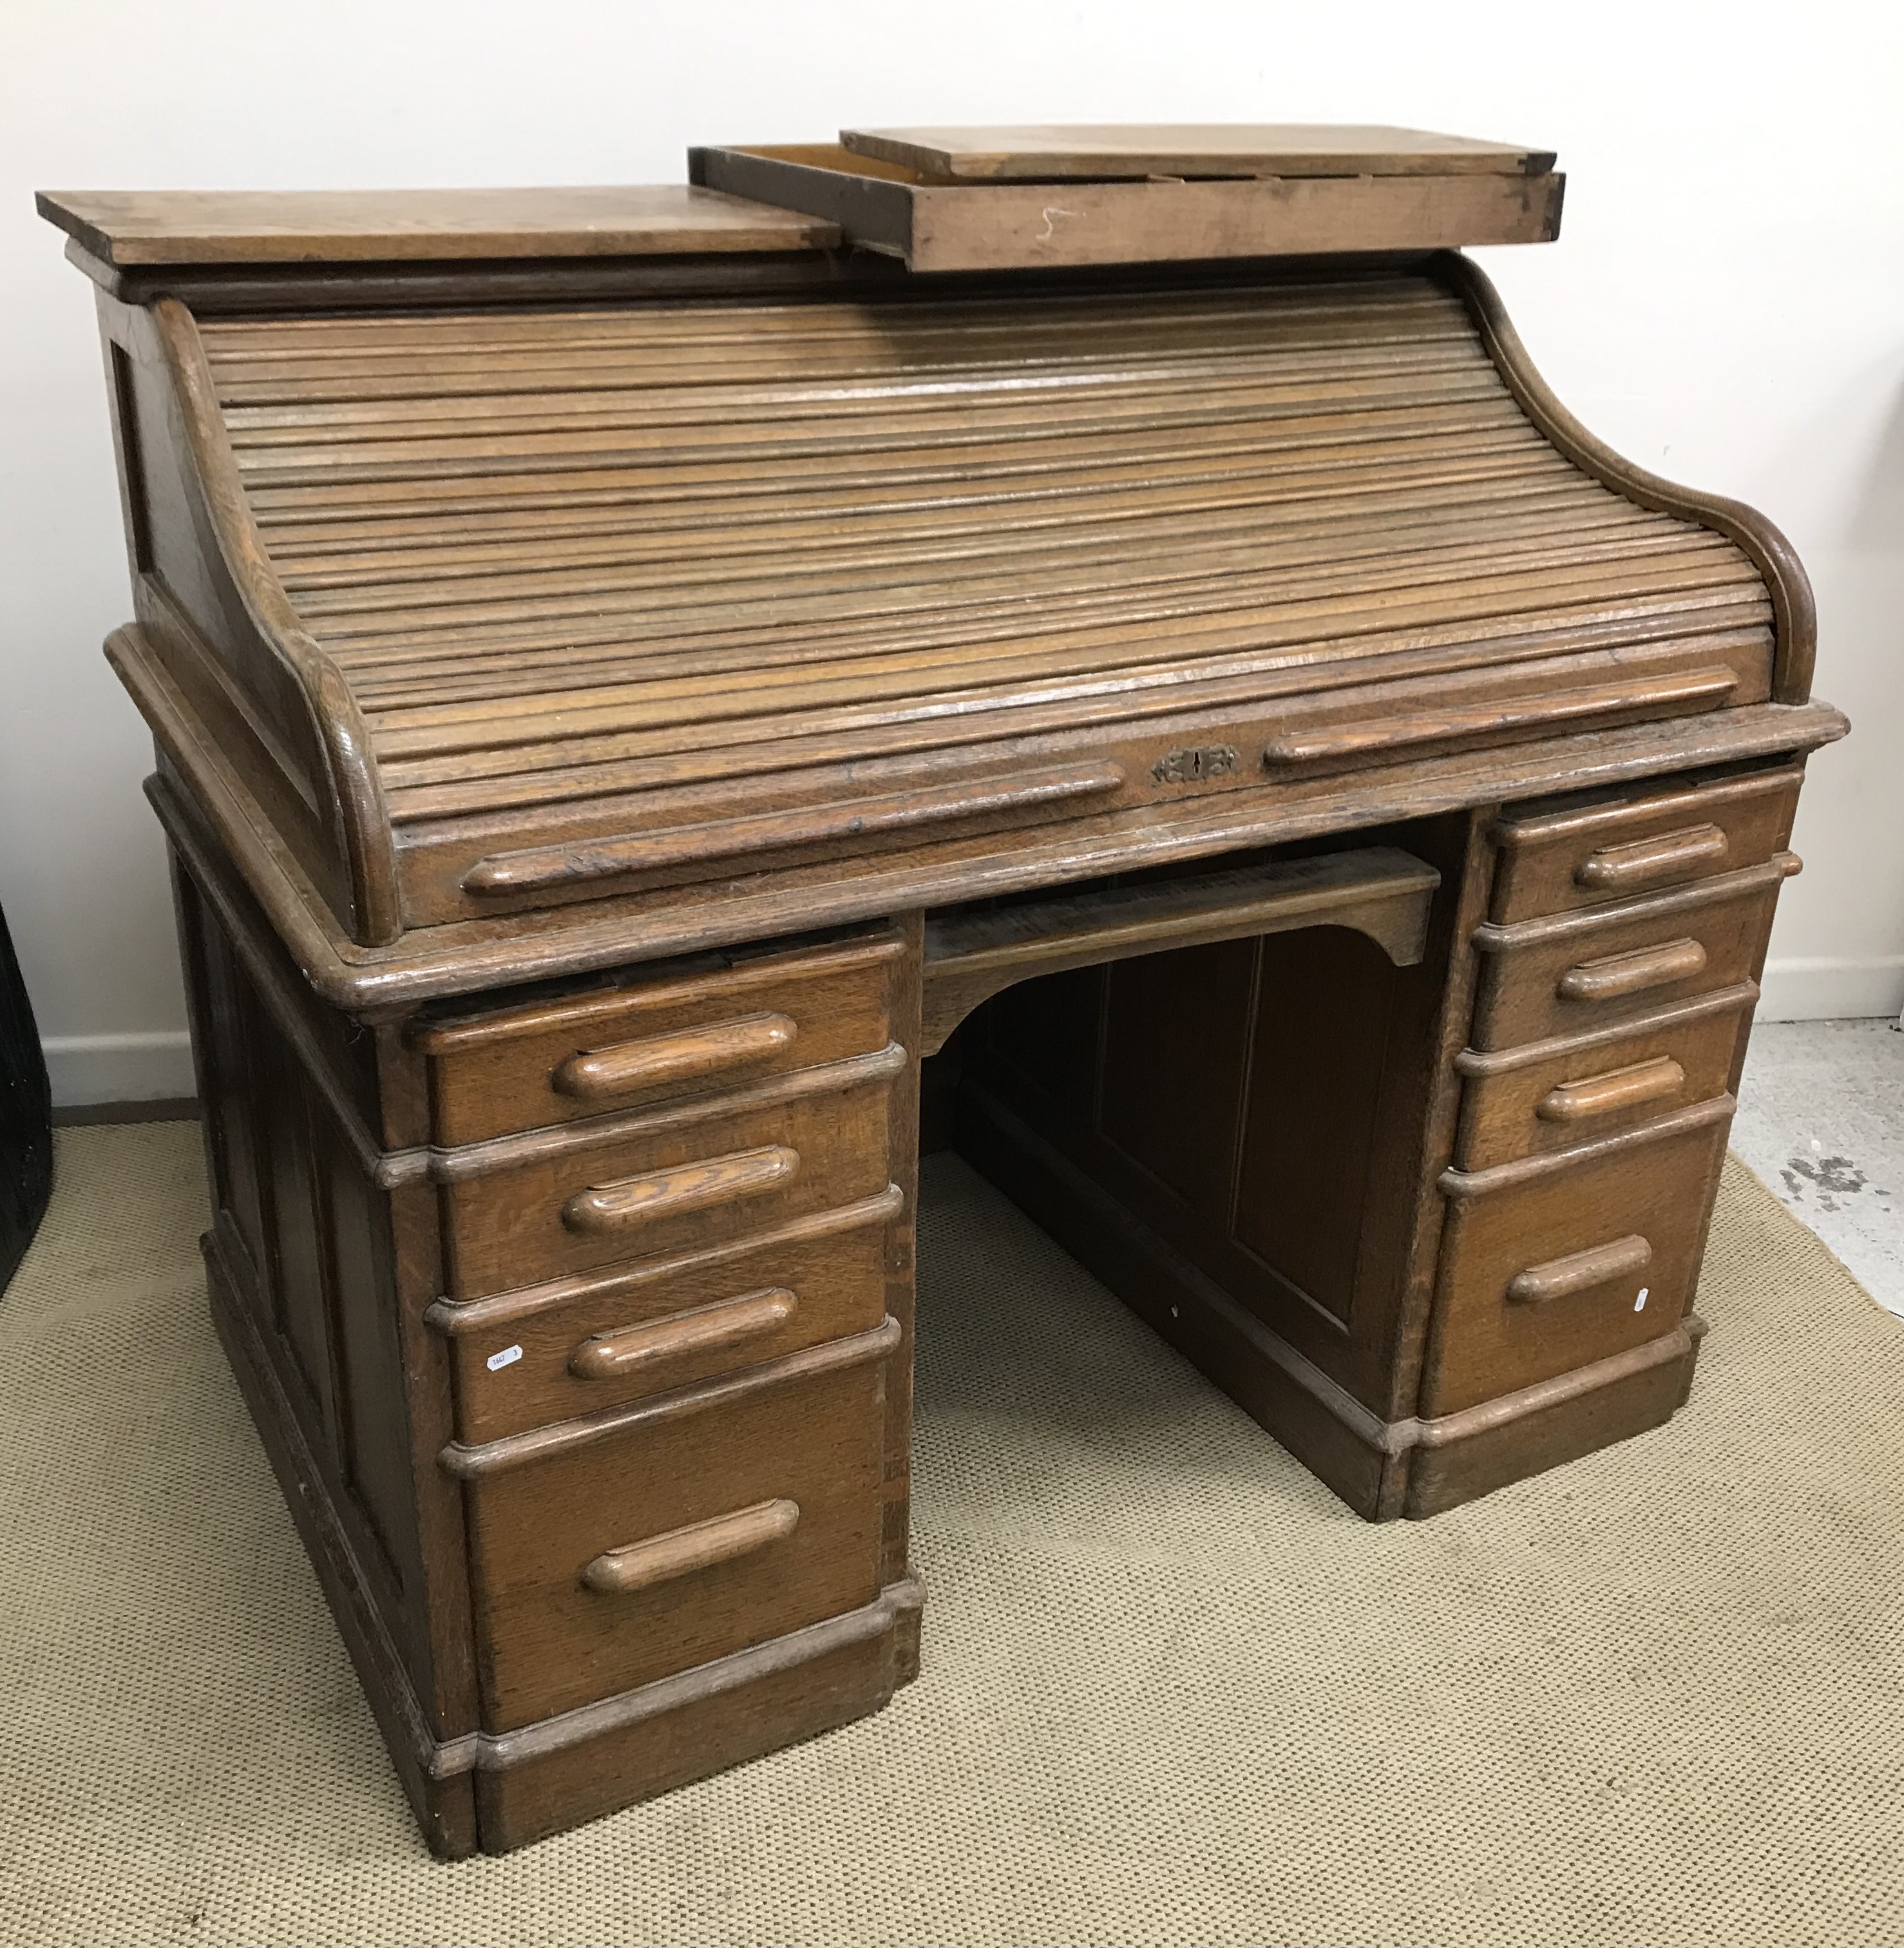 A circa 1900 American tambour or roll top desk, with basic fitted interior, over a central drawer, - Image 2 of 2